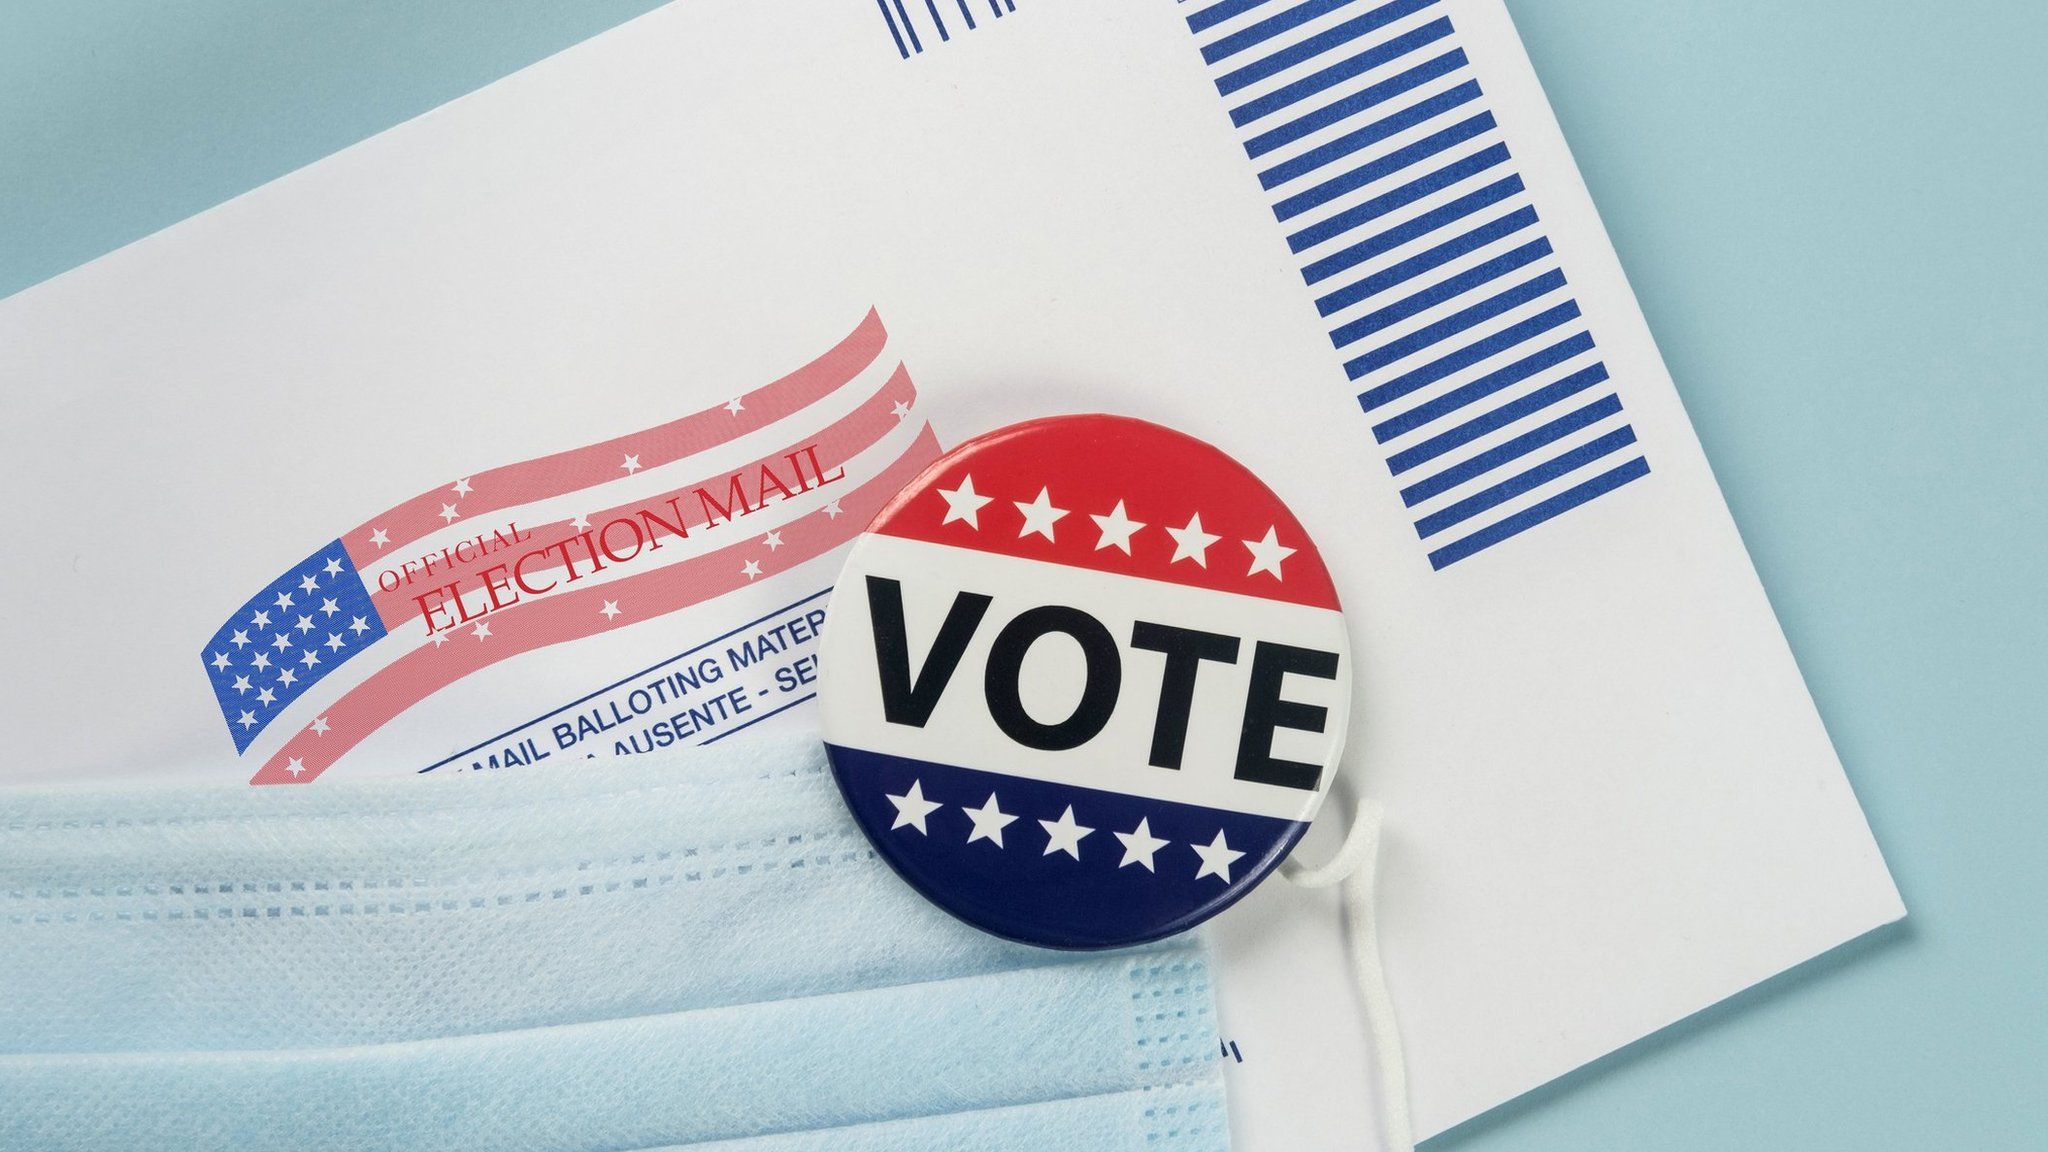 A US postal ballot, a badge saying "VOTE" and a face mask